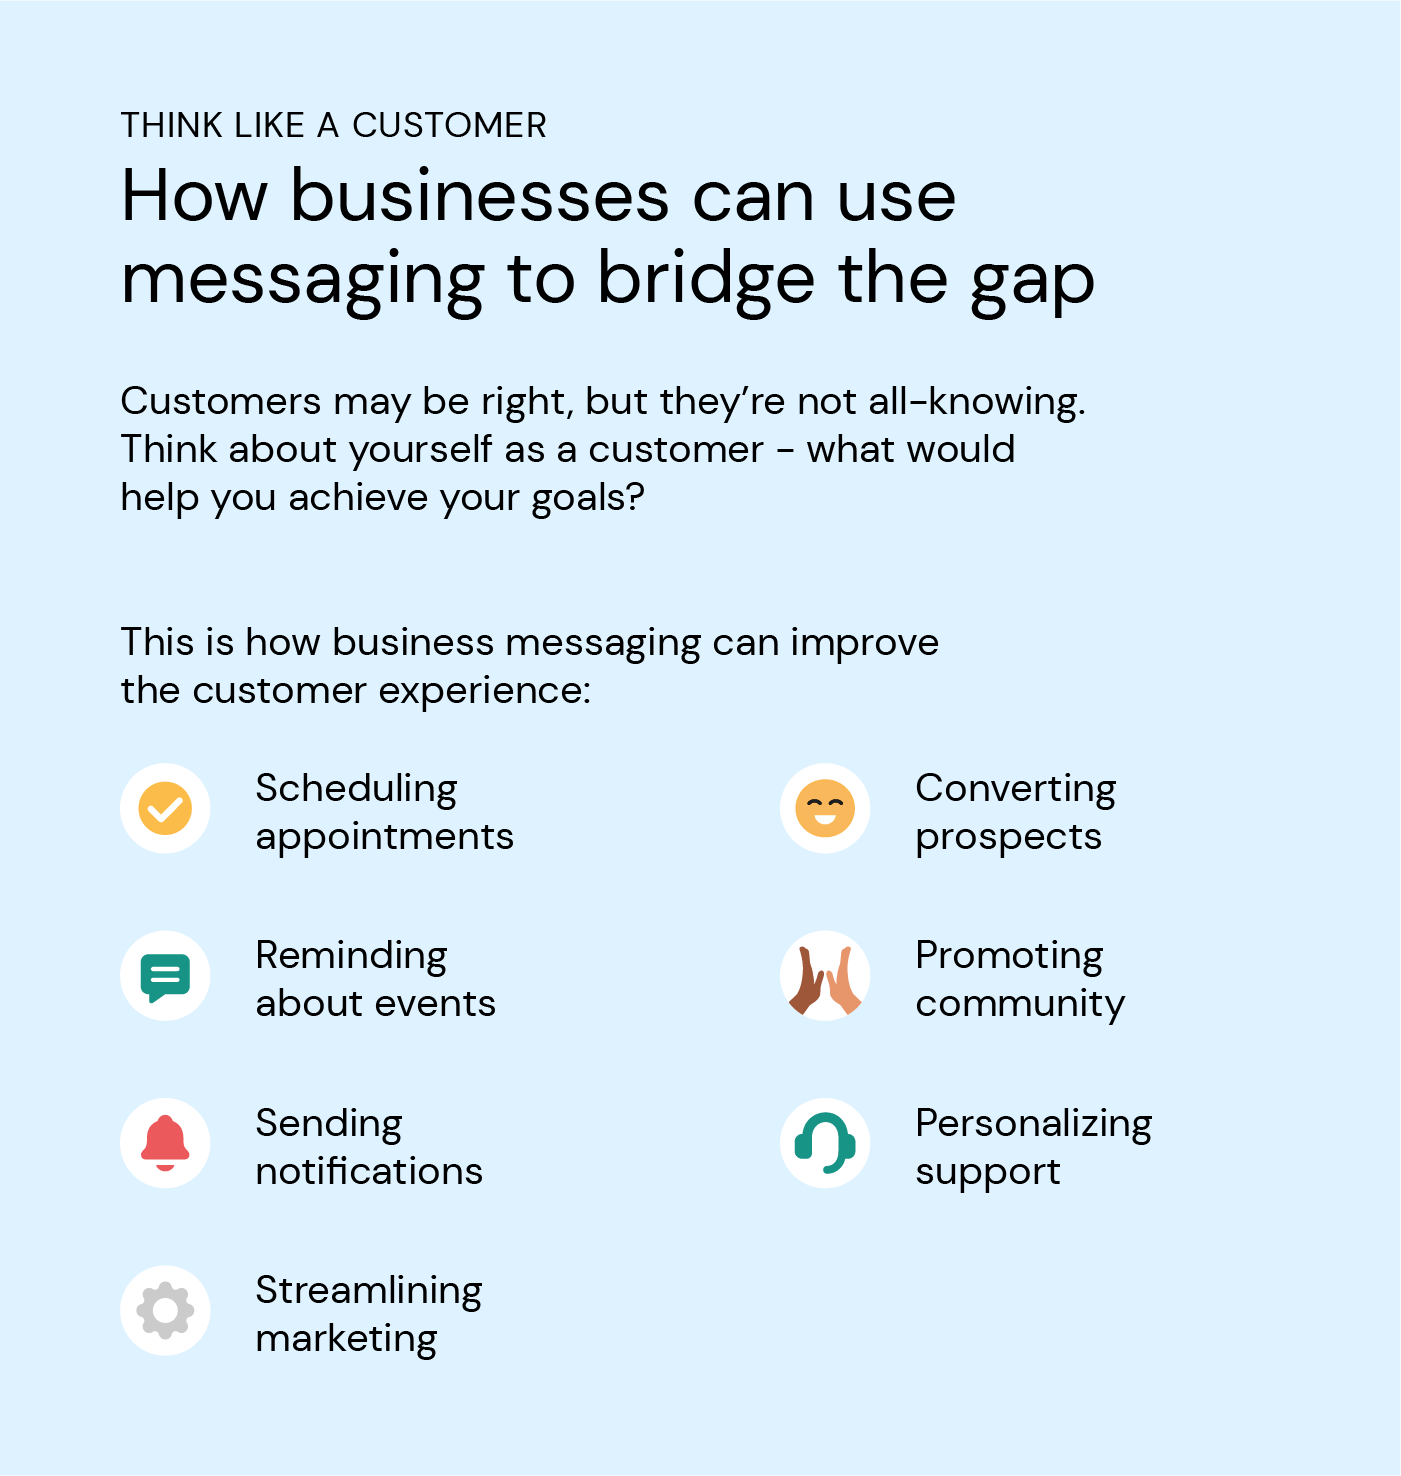 Examples of good business messaging include scheduling appointments, reminders, notifications, marketing, converting prospects, promoting community, and personalizing support.